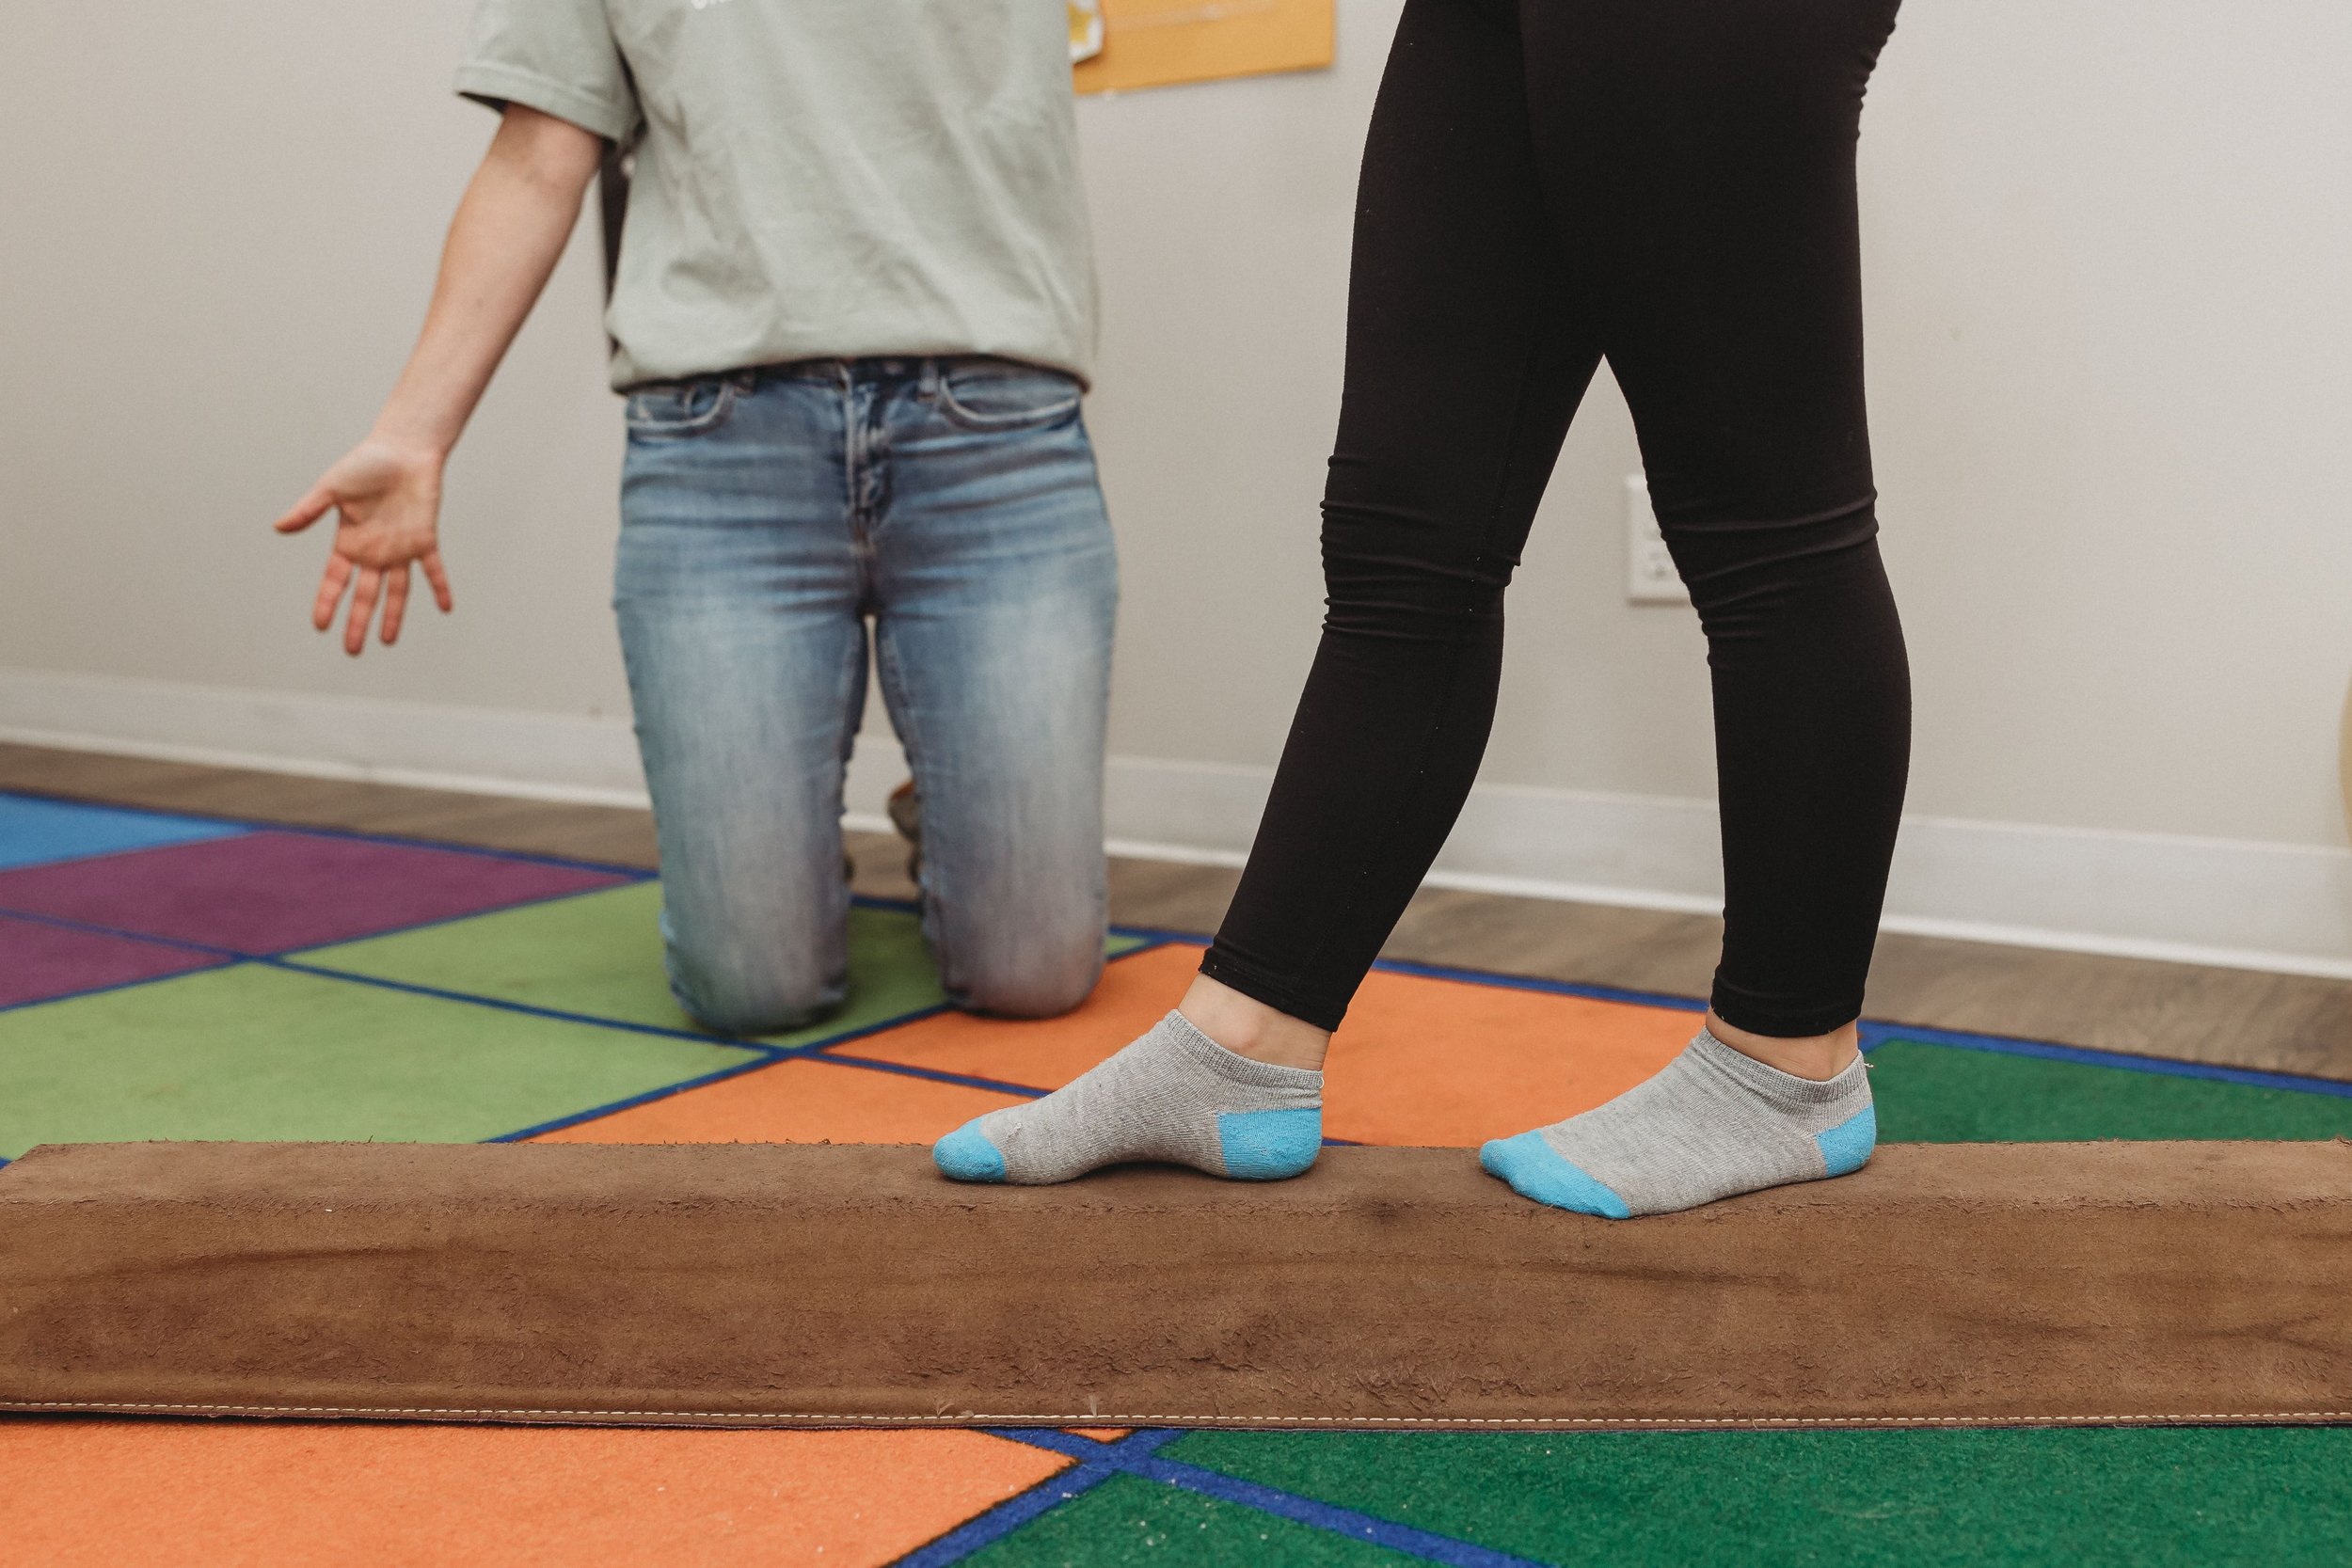  an adult kneels next to a balance beam that a child walks on in front of them 